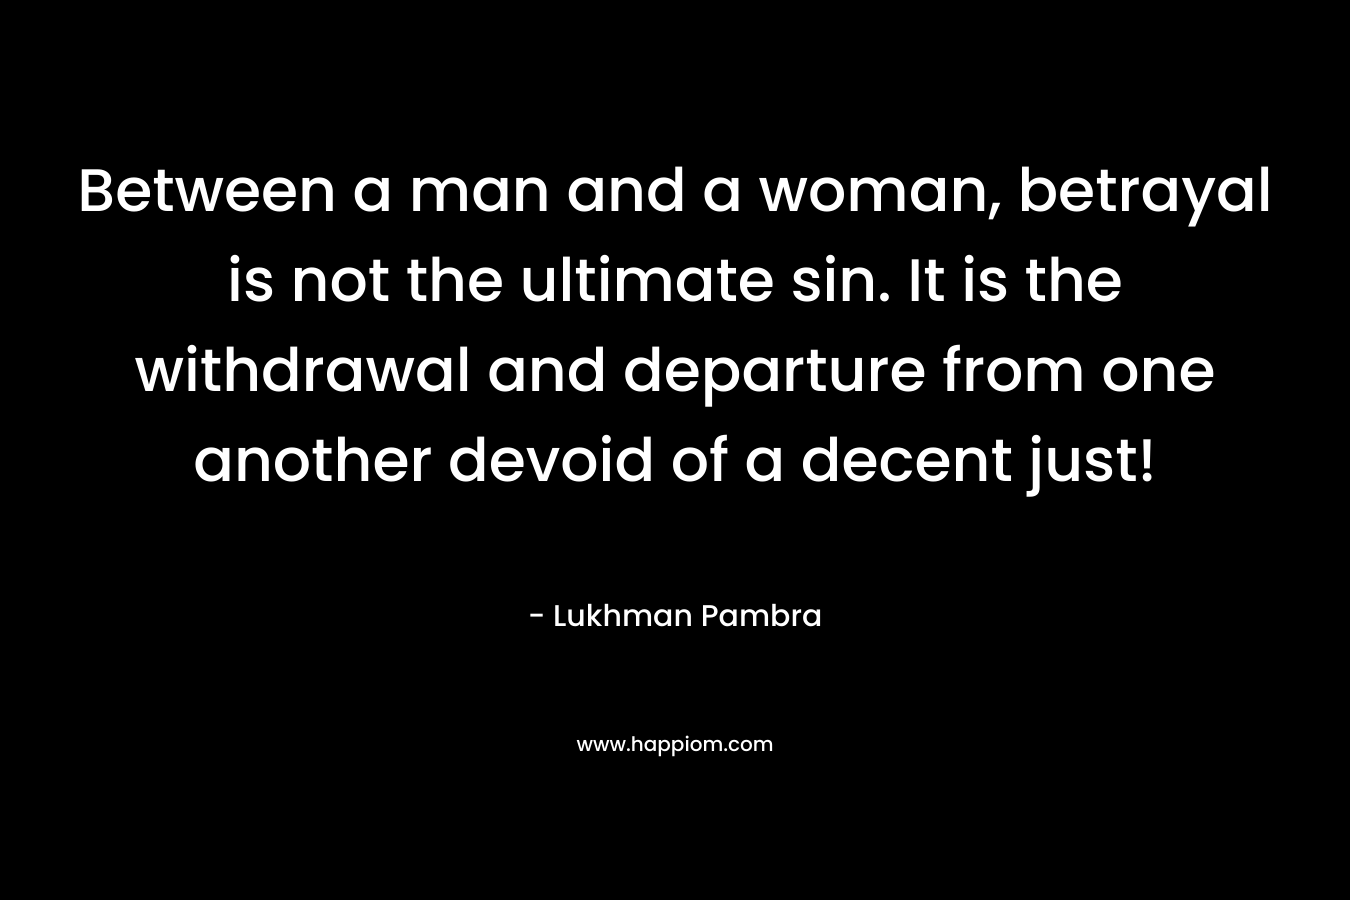 Between a man and a woman, betrayal is not the ultimate sin. It is the withdrawal and departure from one another devoid of a decent just!